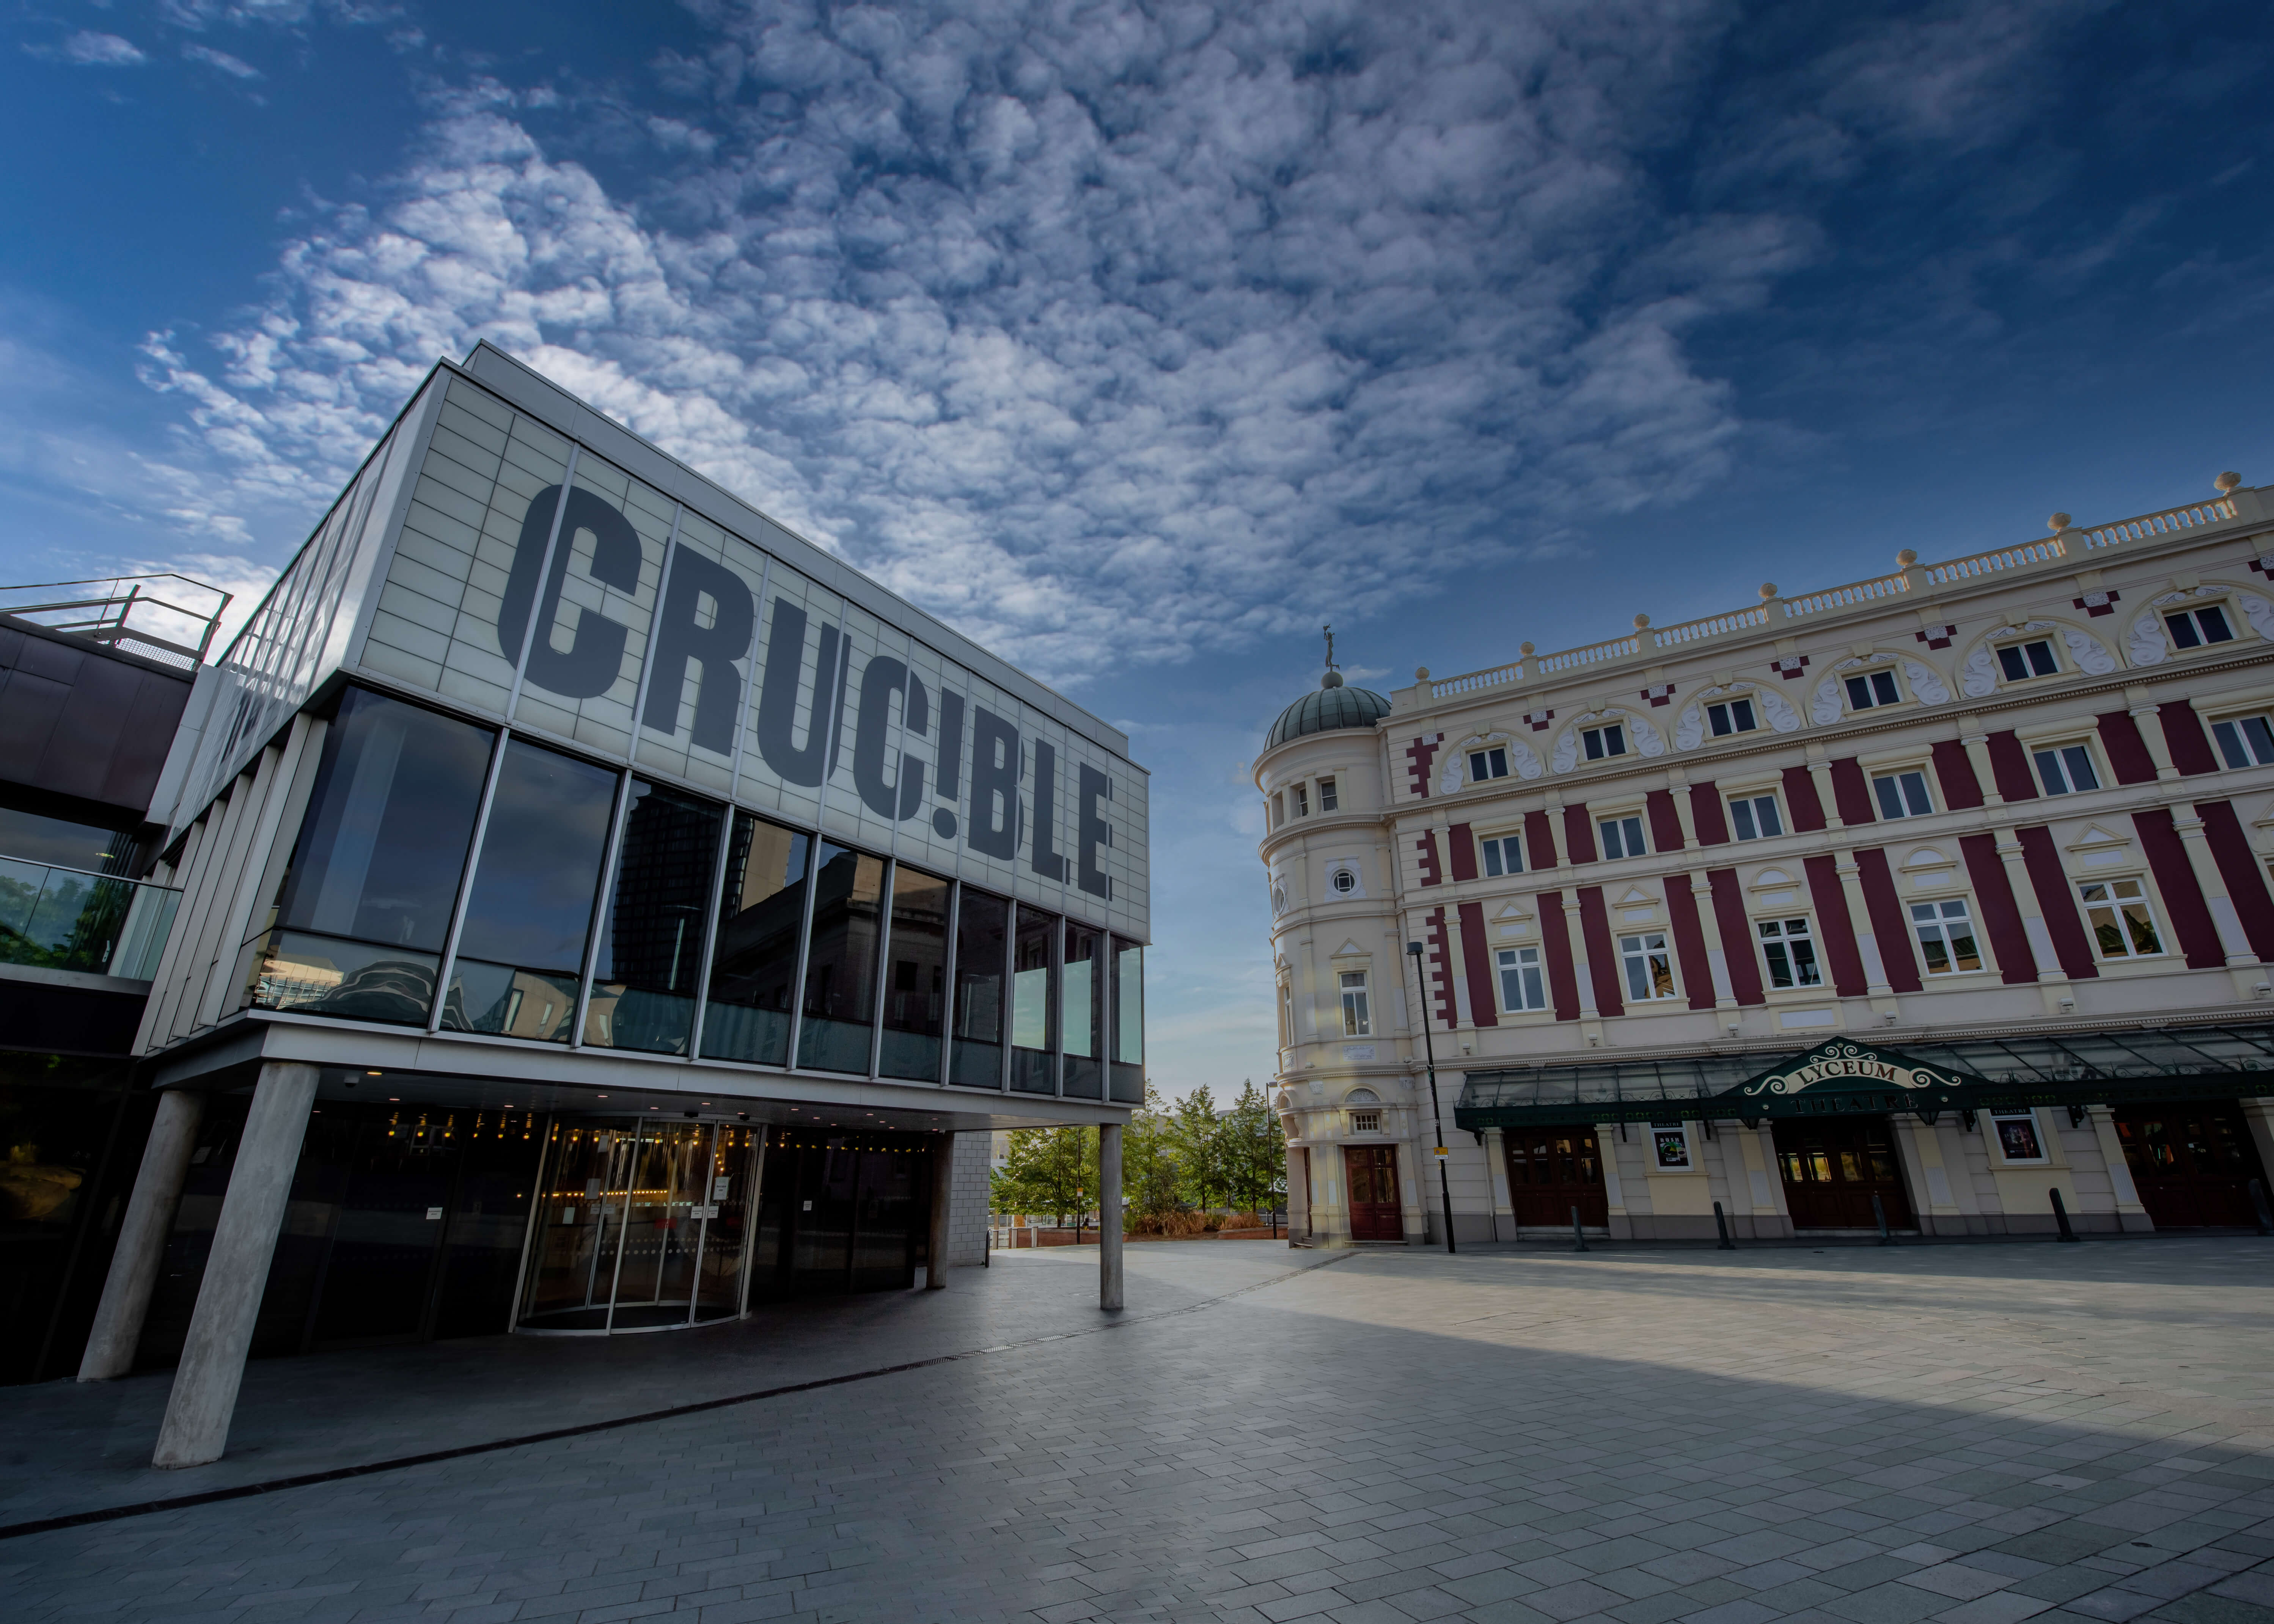 The Crucible and Lyceum theatres in the sunshine with blue sky behind. The Crucible is a brutalist building with a glass panelled room held up by concrete pillars and a panel above which reads in capital letters: CRUC!BLE. The Lyceum is a grand Victorian theatre, painted cream and burgundy. It has a rounded corner topped with a green lead turret with a statue of Mercury at the very peak.